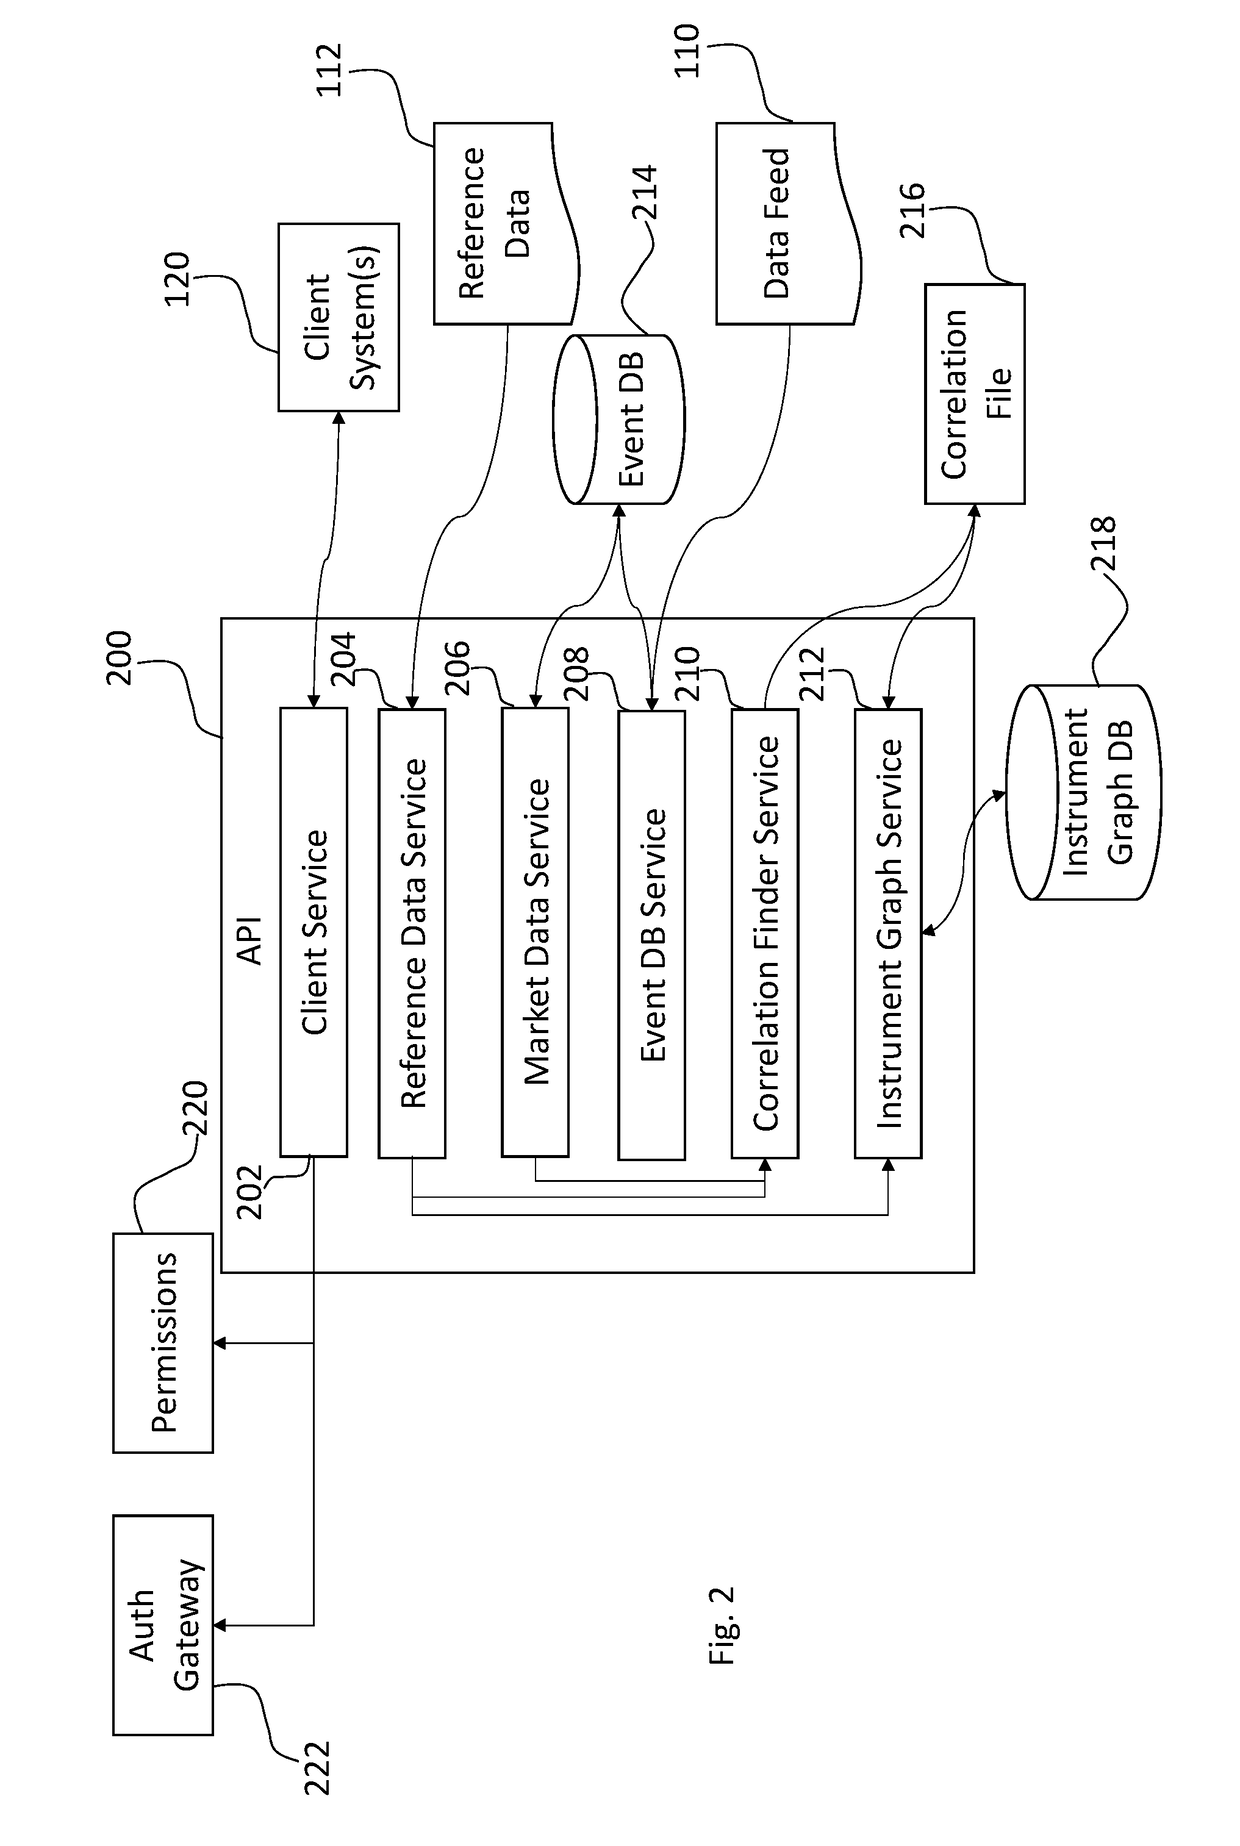 Systems and methods for correlating large datasets of electronic data messages